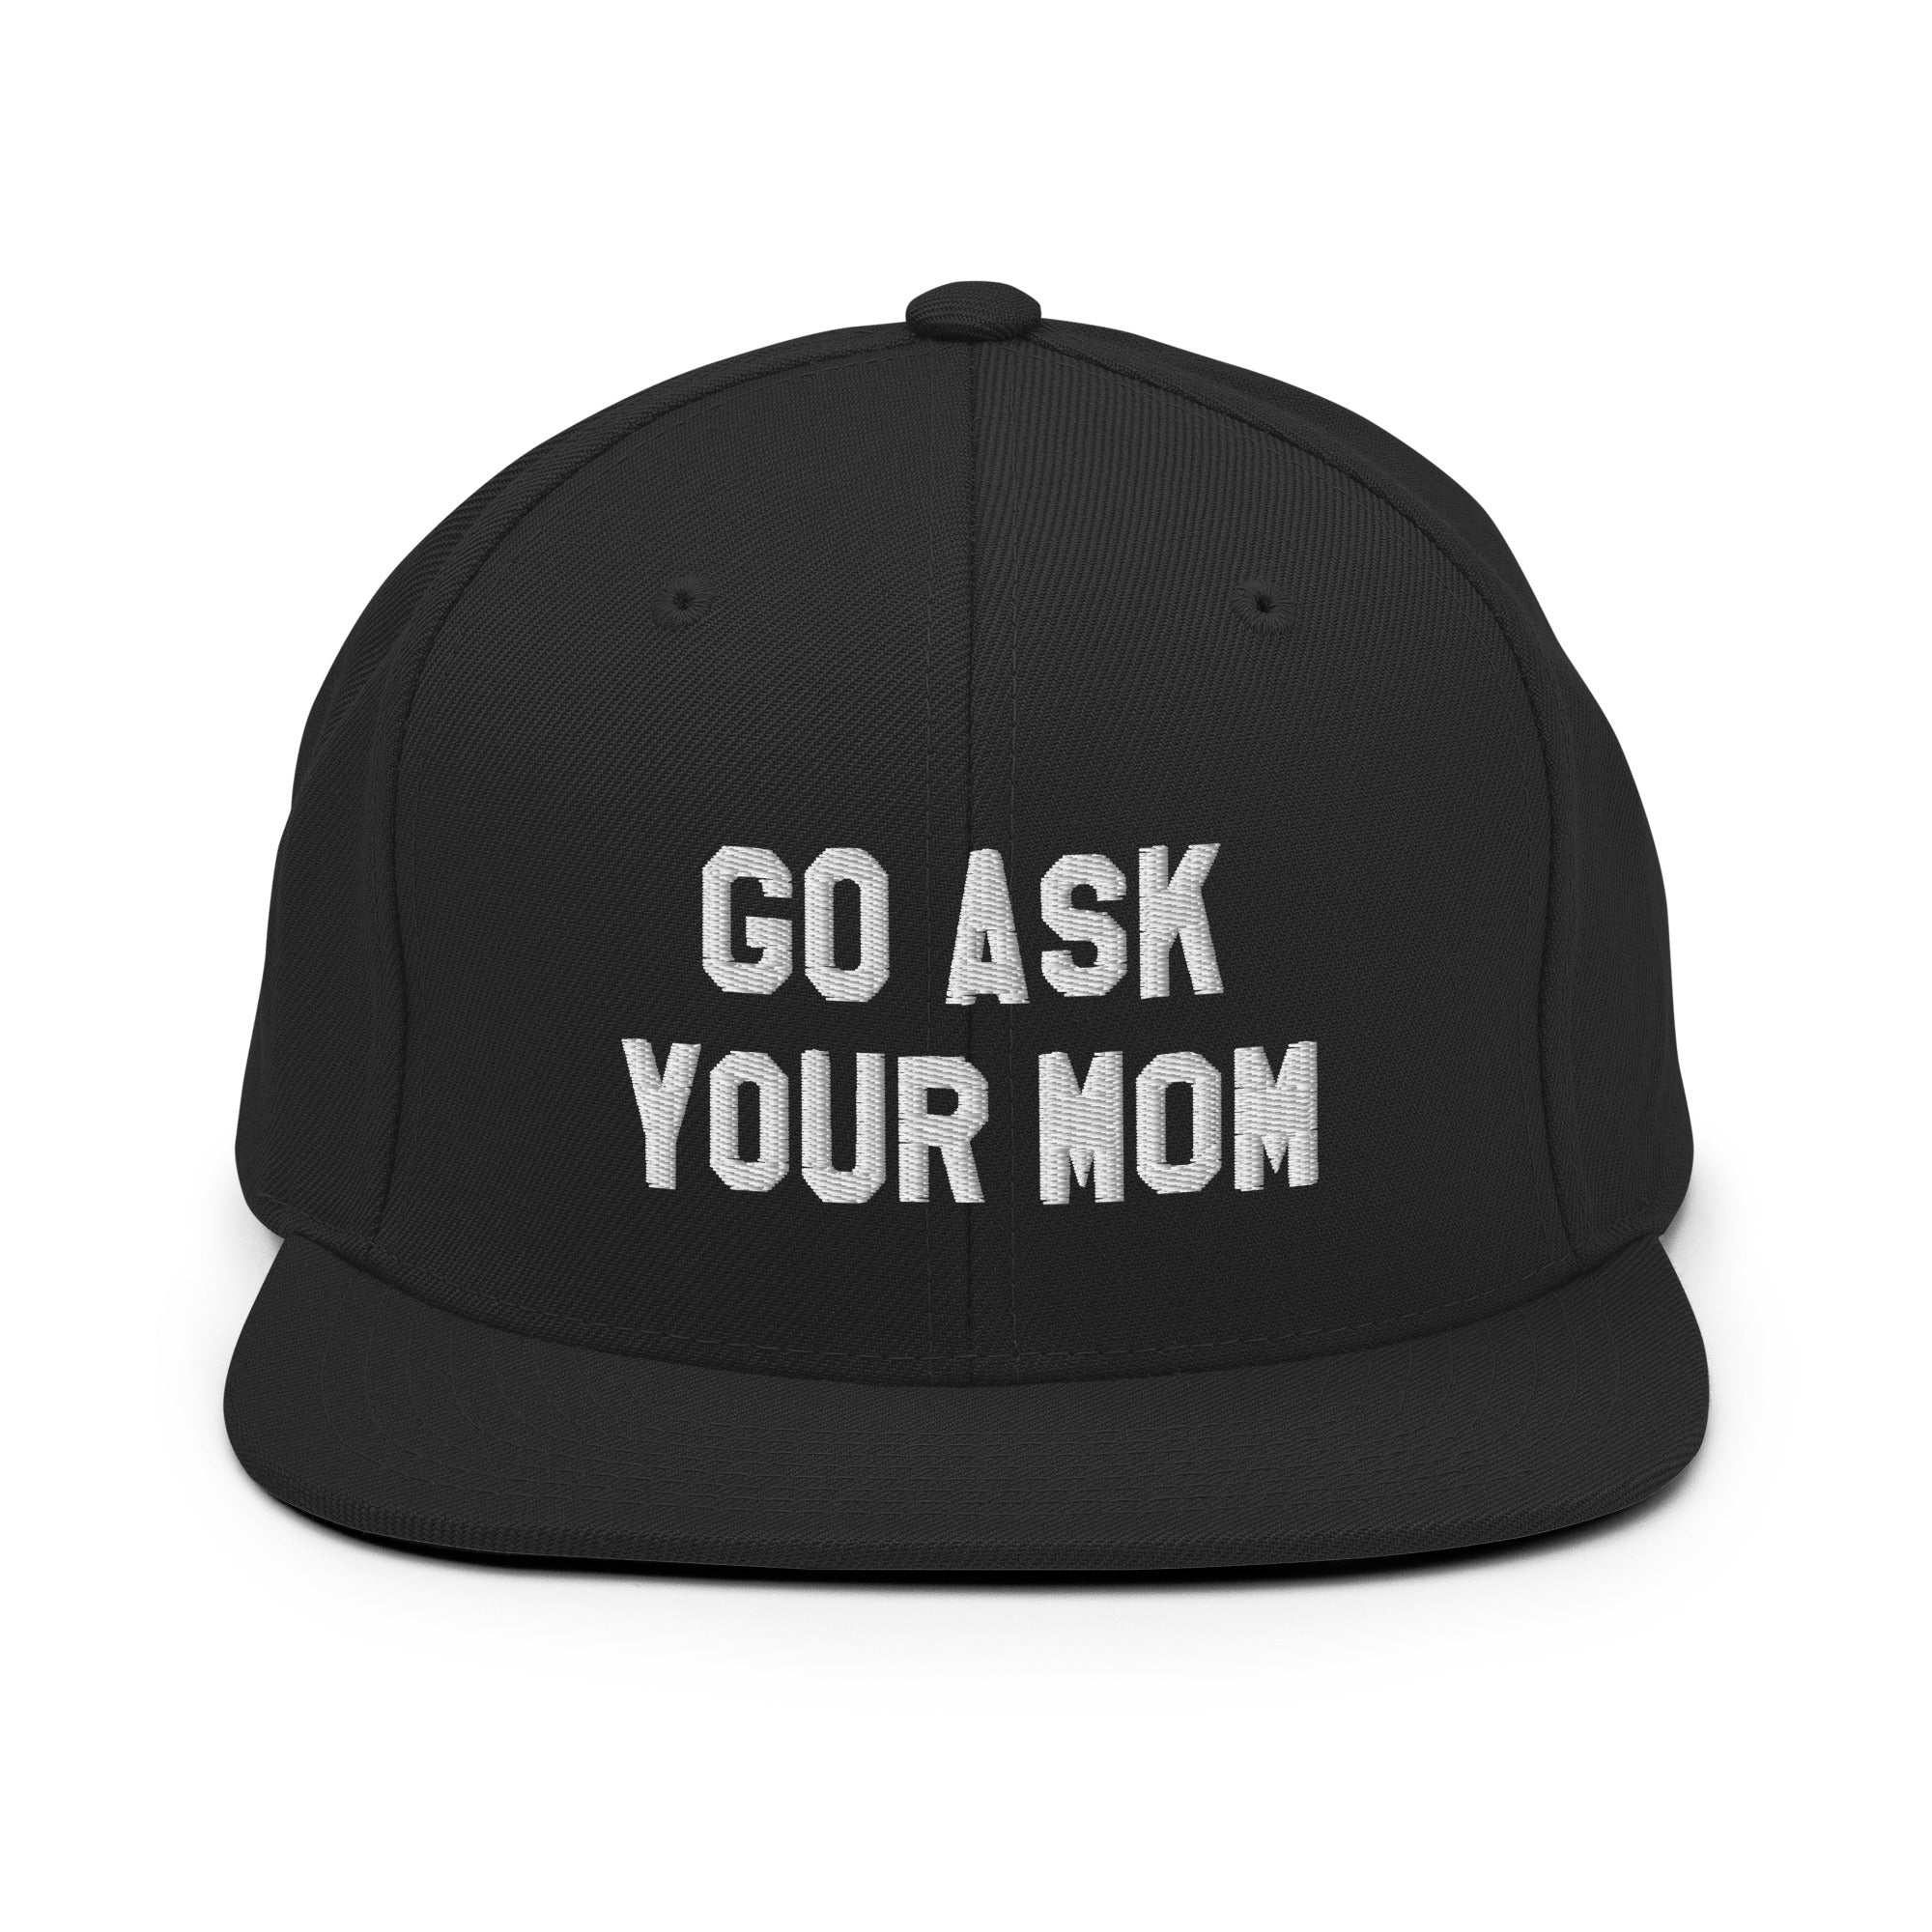 Go Ask Your Mom - Snapback Hat